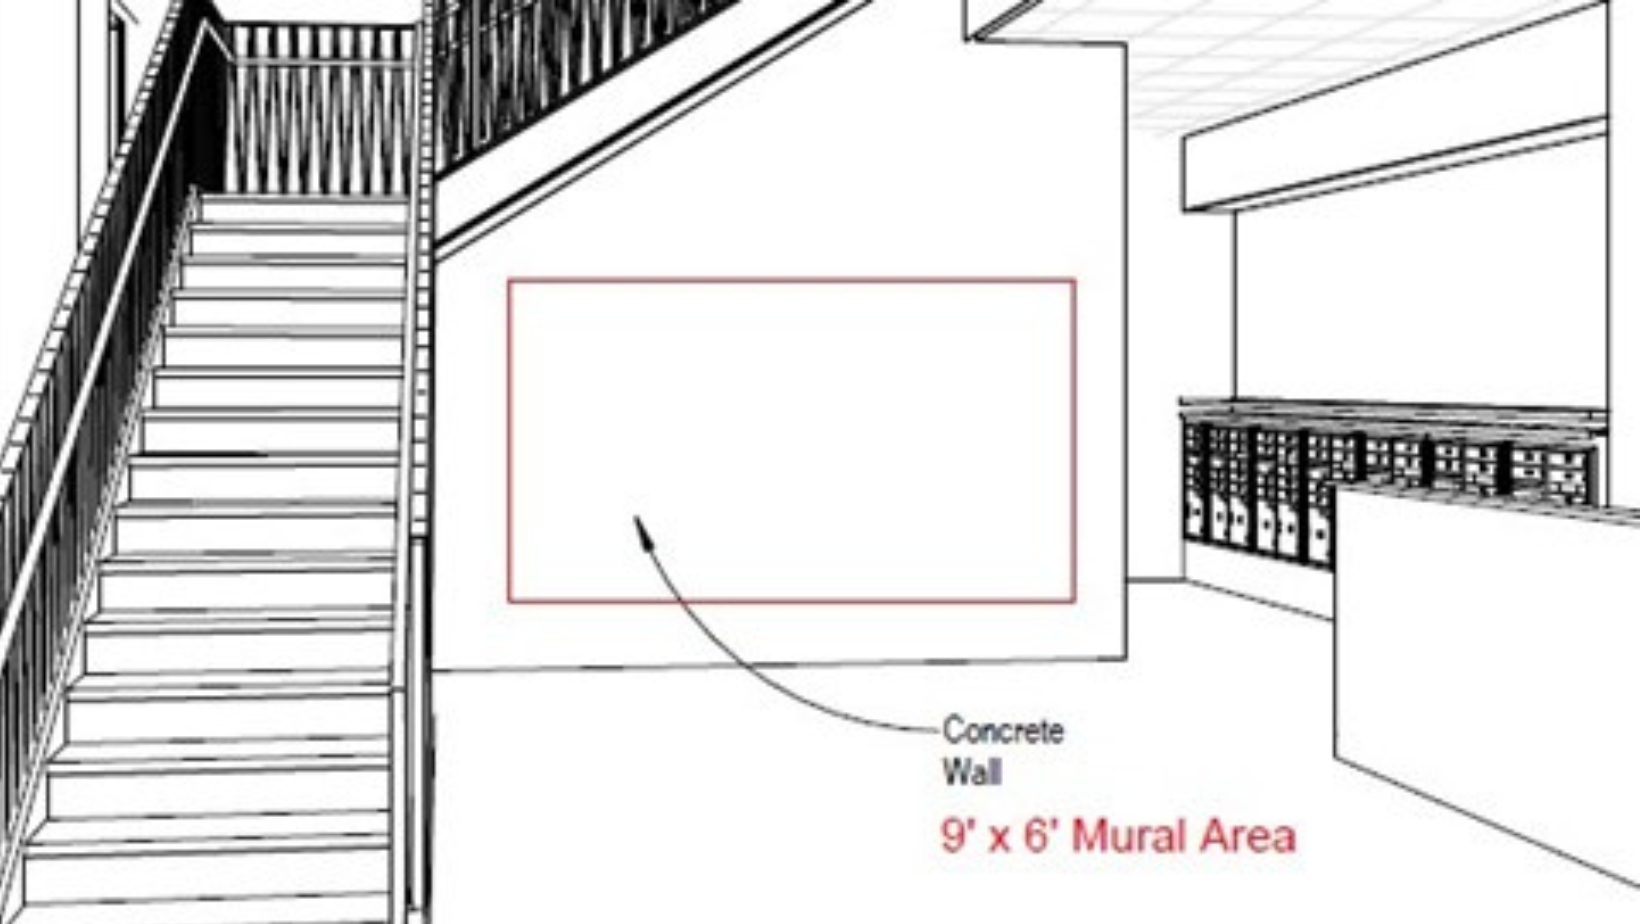 A sketch shows a room with stairs on the left and a wall at the back with a red rectangle labeled "Concrete Wall: 9' x 6' Mural Area'.